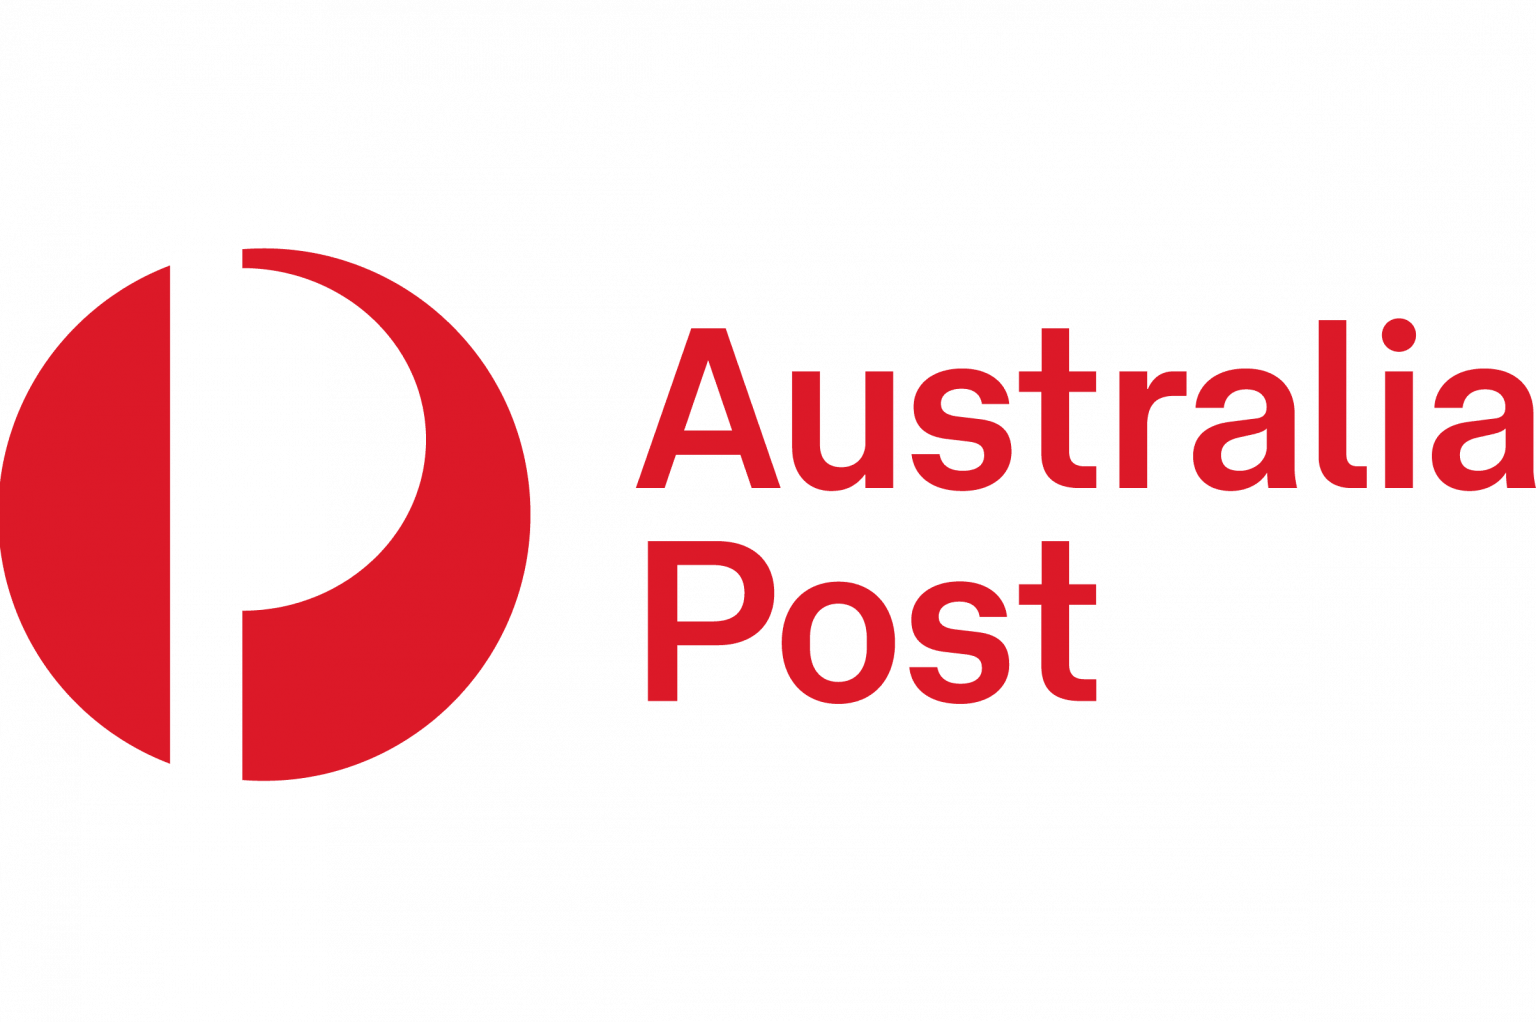 Ship your orders with ease through Australia Post MyPost